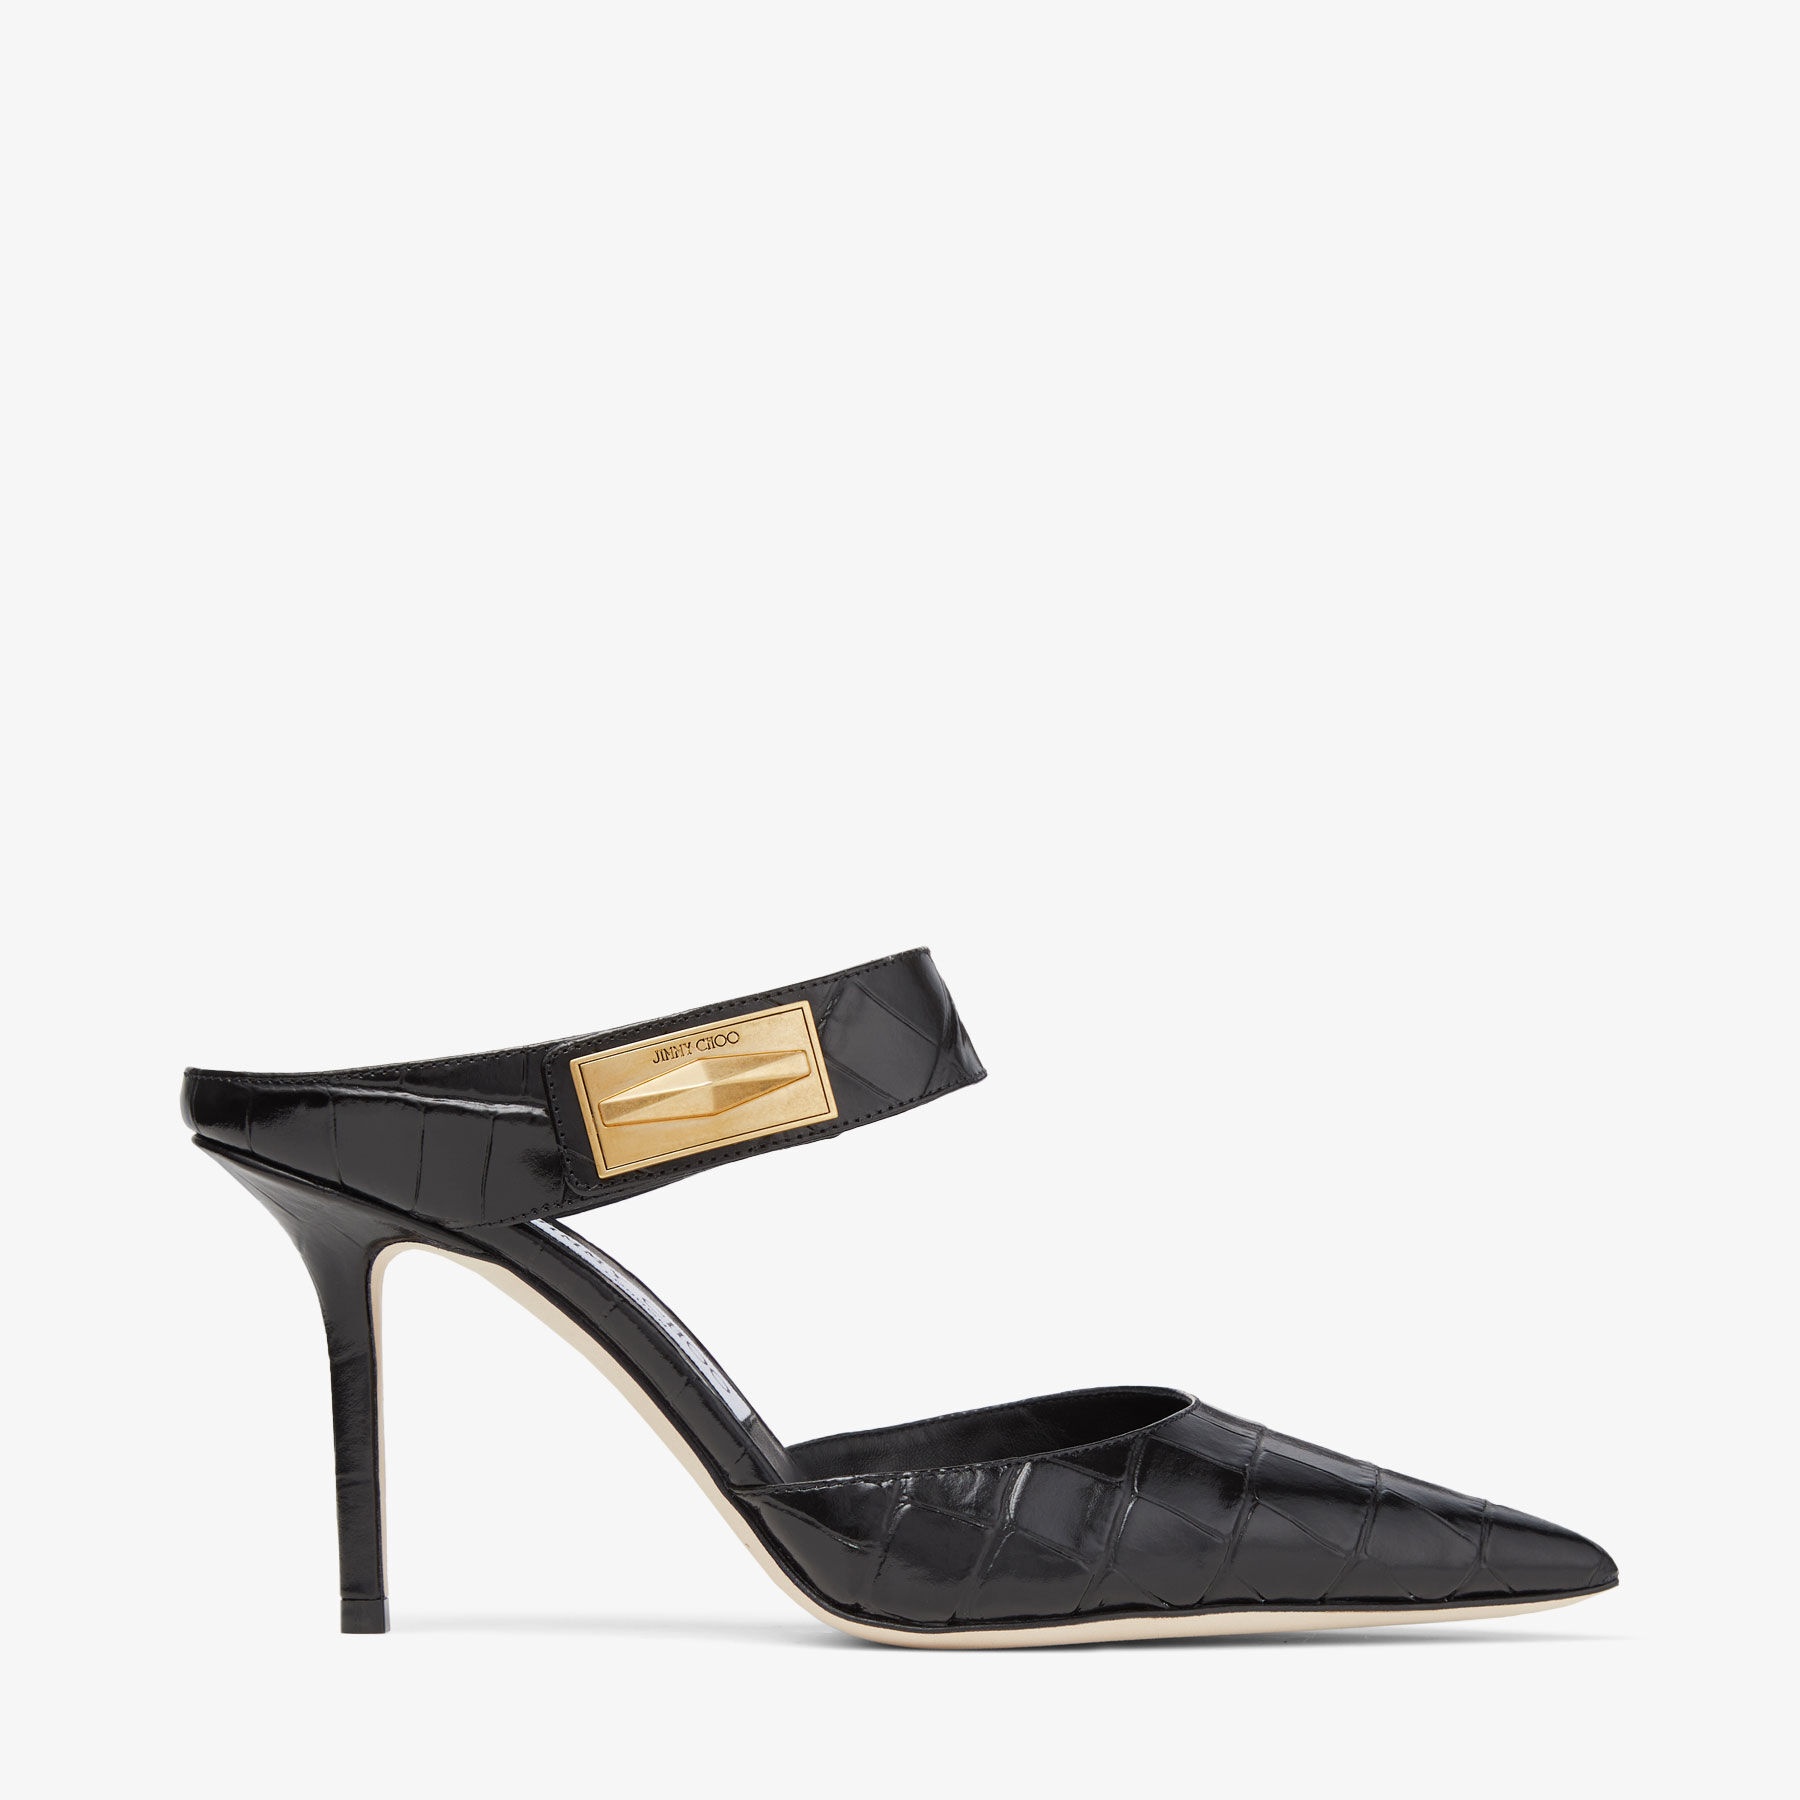 Nell Mule 85
Black Croc-Embossed Leather Mules - 1